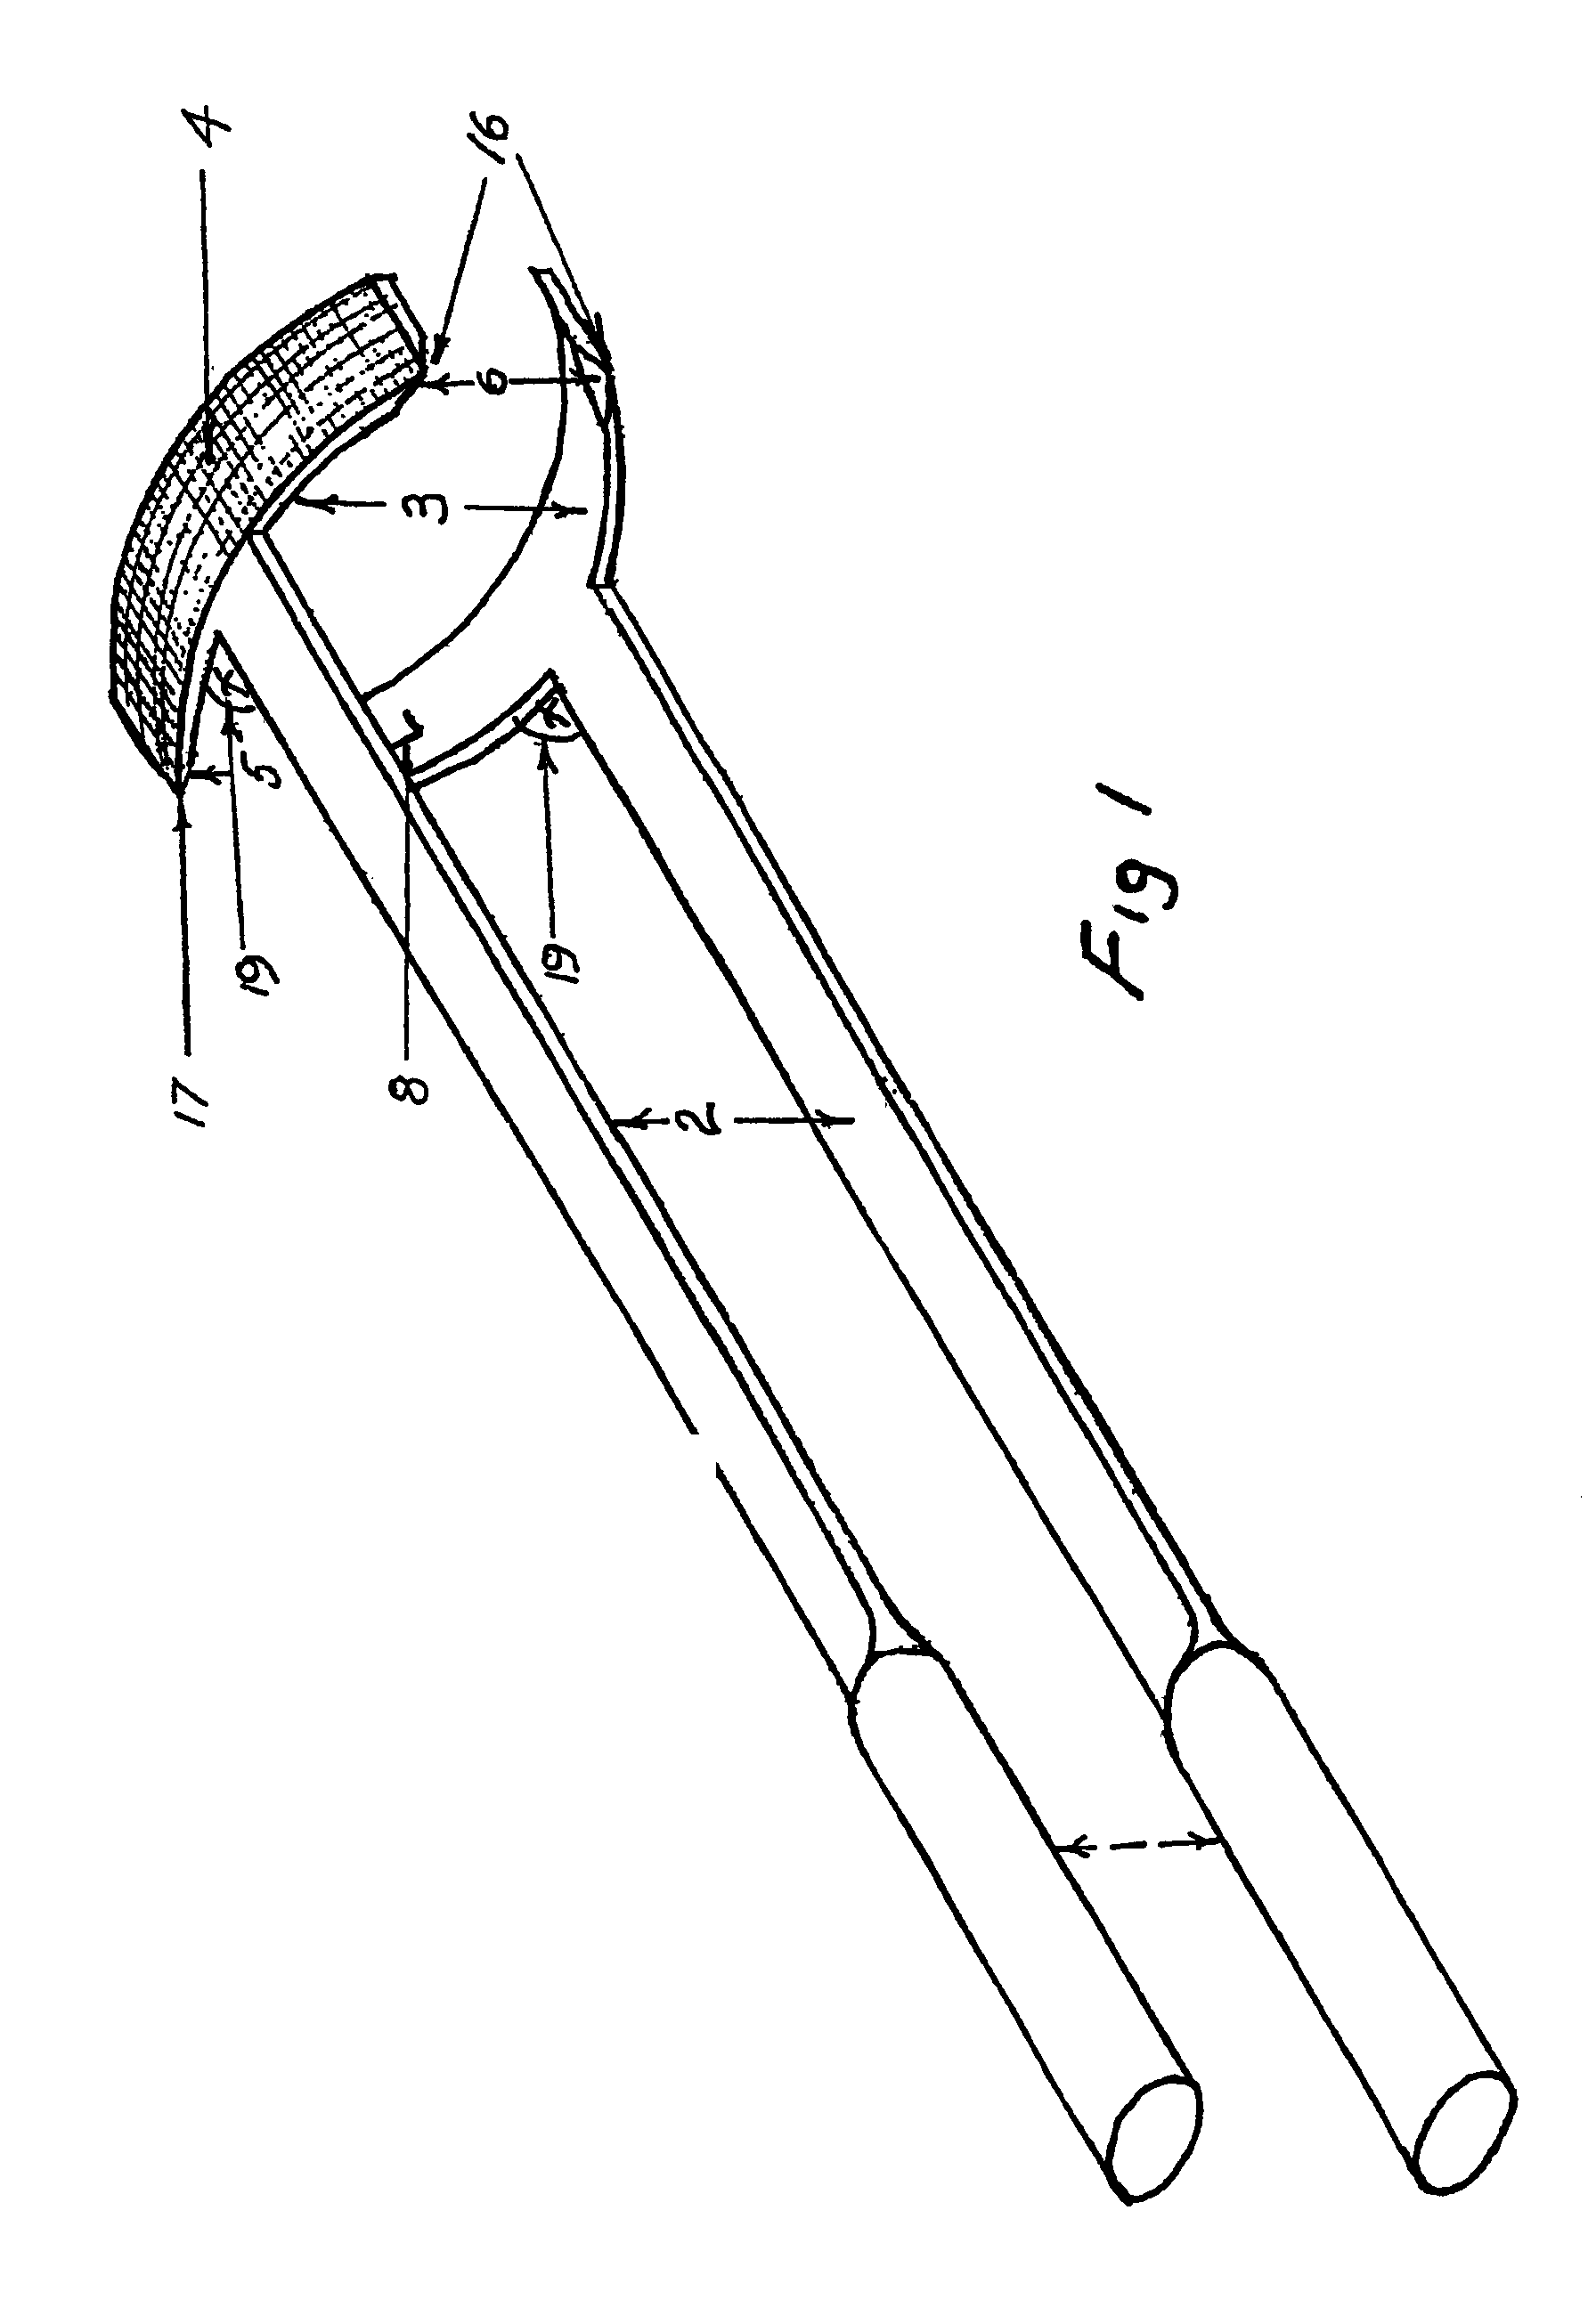 Device to assist in putting on and taking off clothing